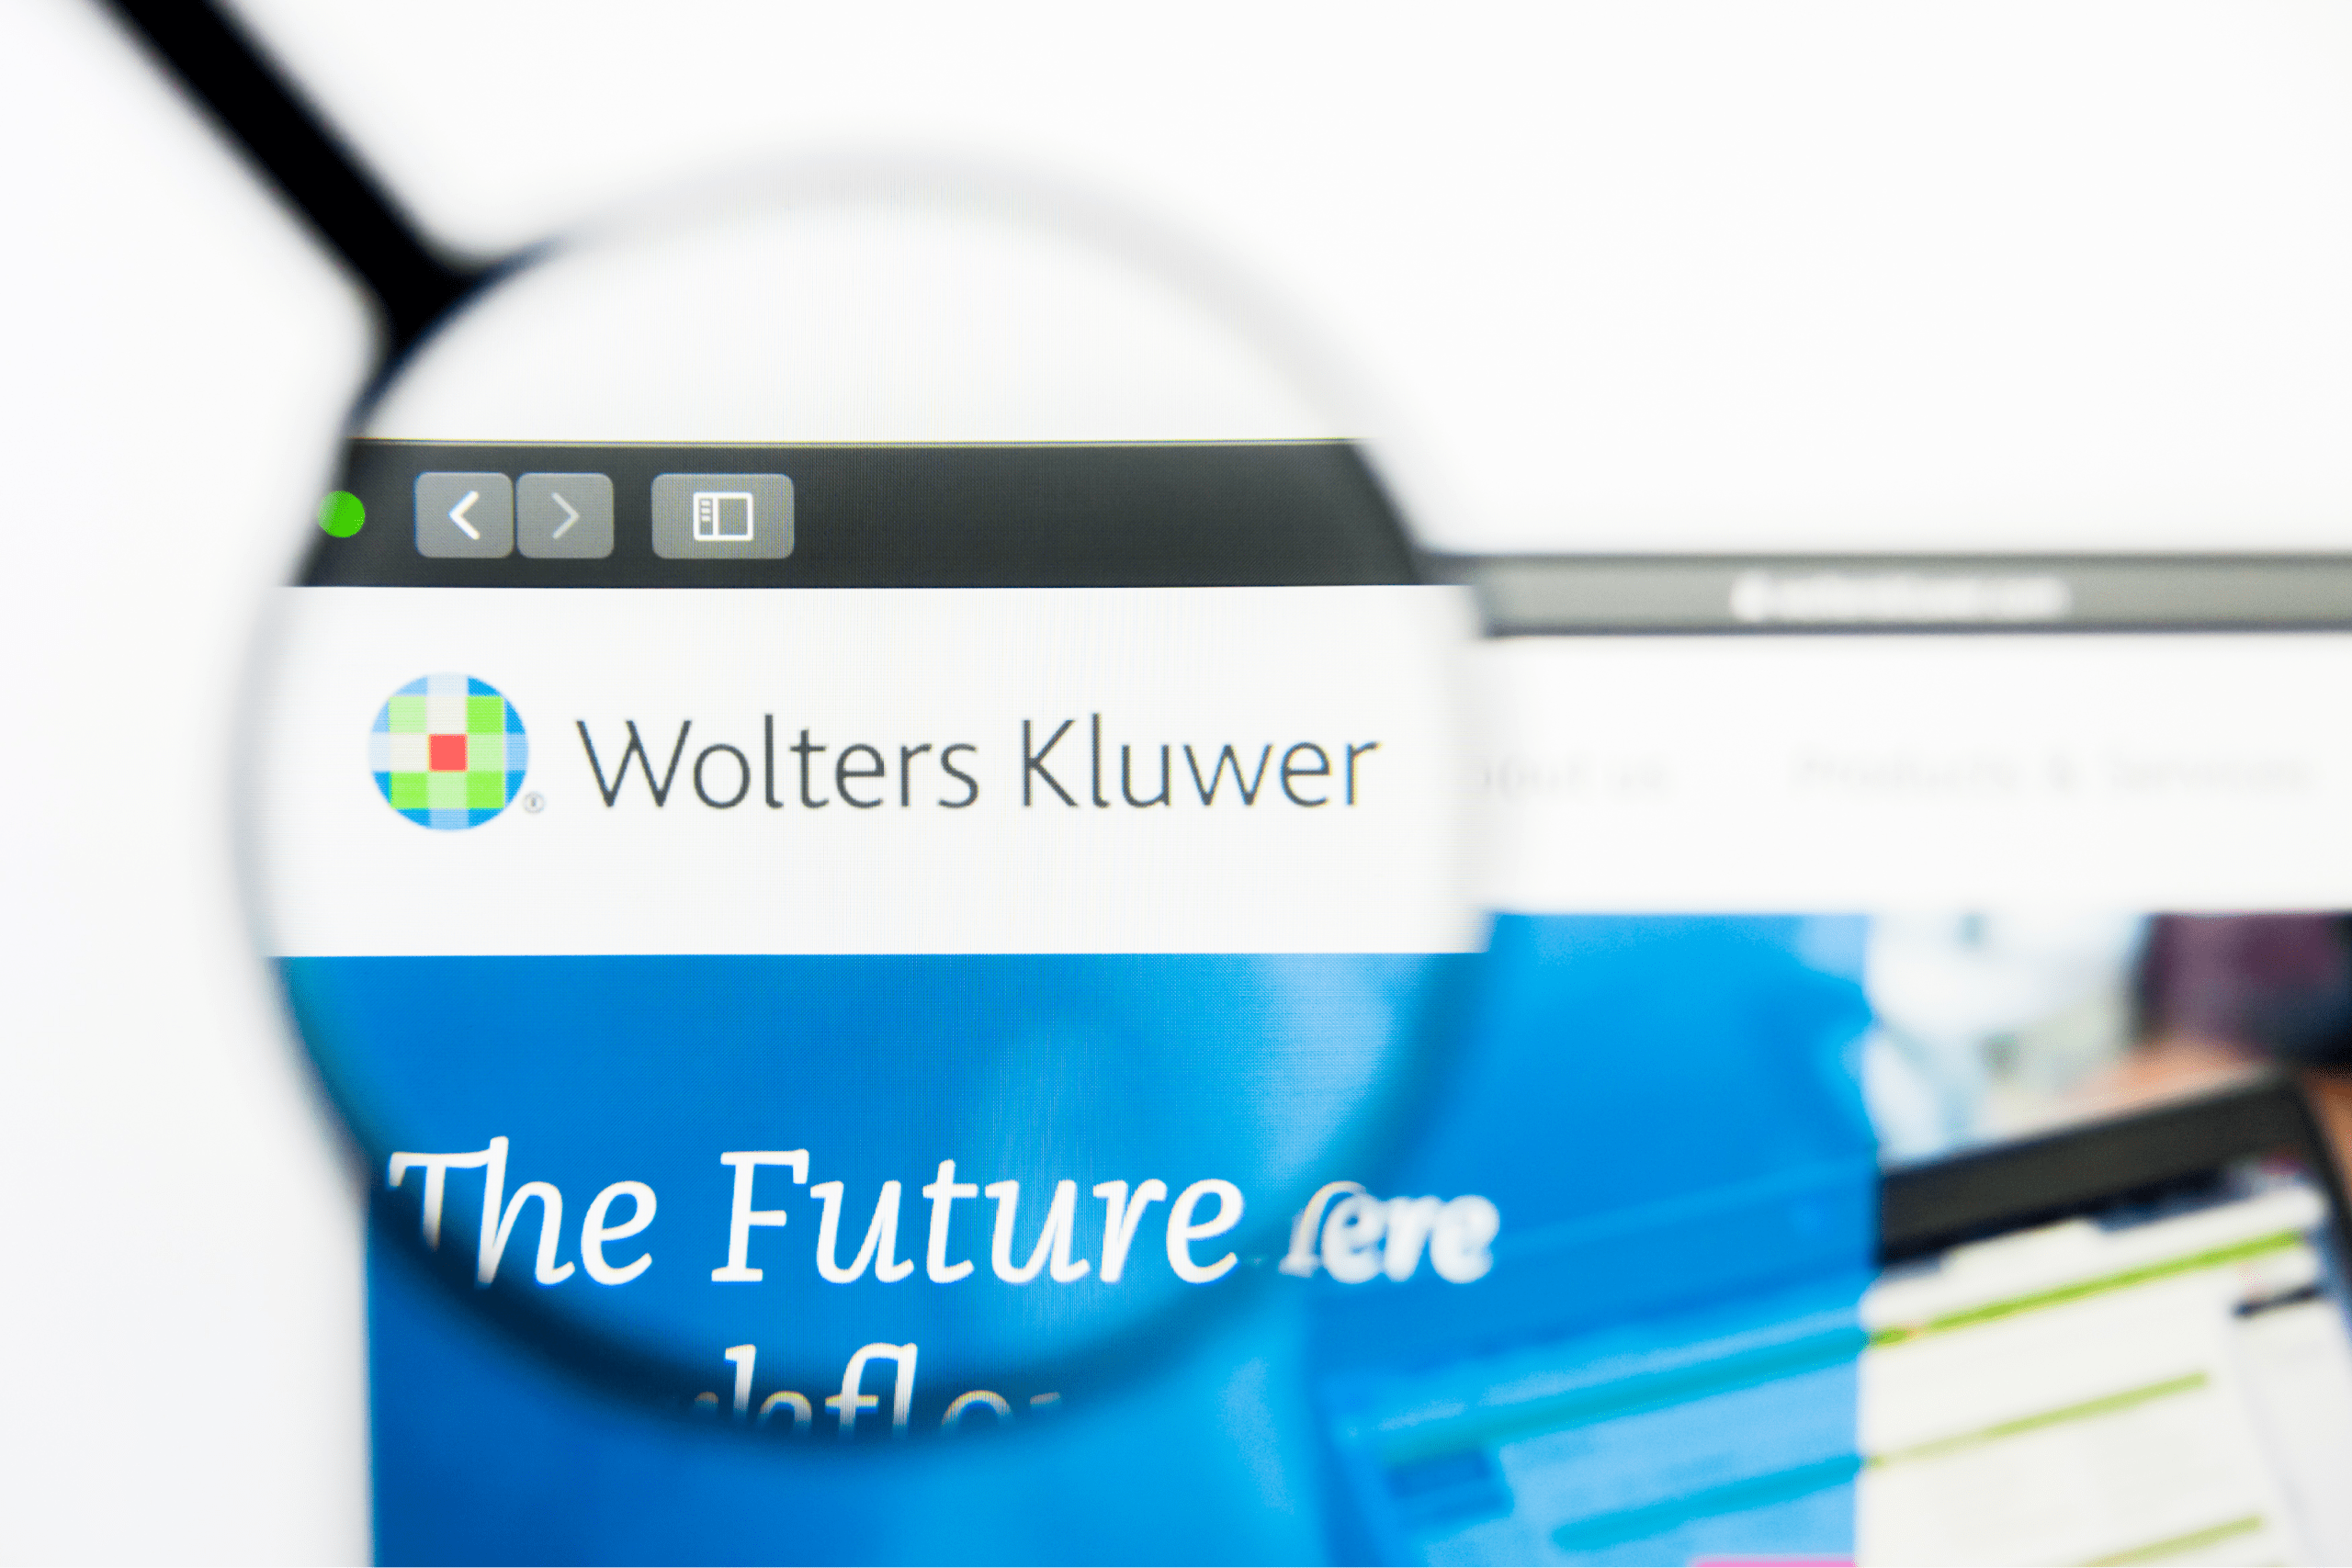 Wolters Kluwer in browser tab with magnifying glass